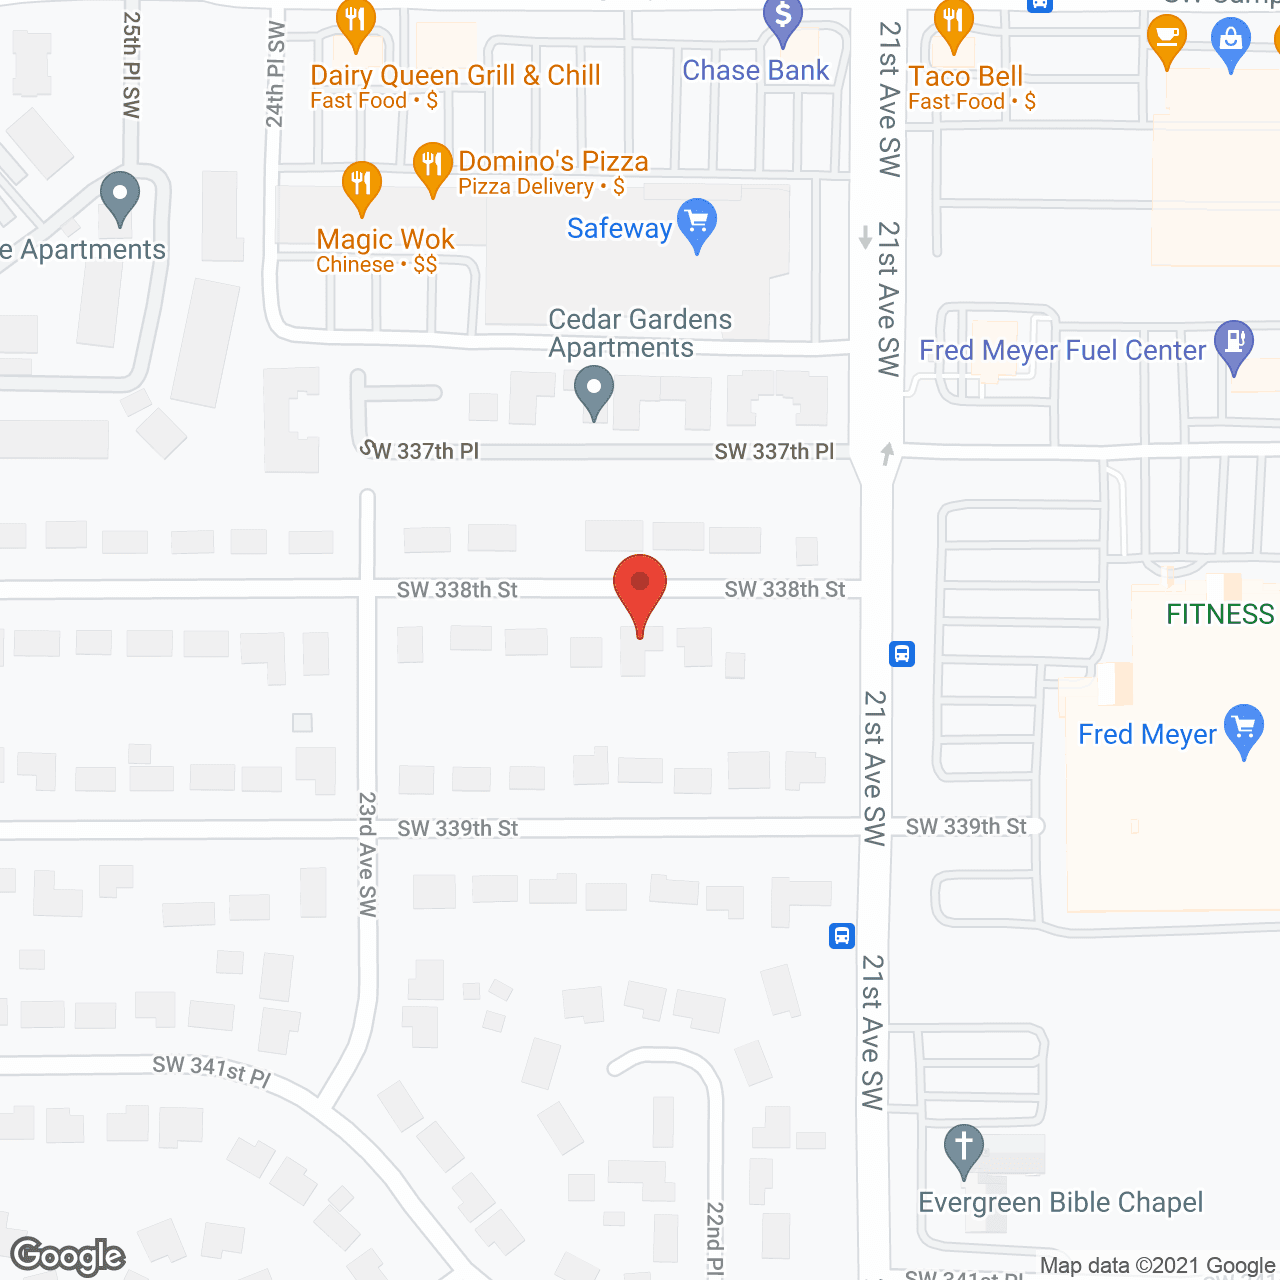 Cone Adult Family Home Care in google map